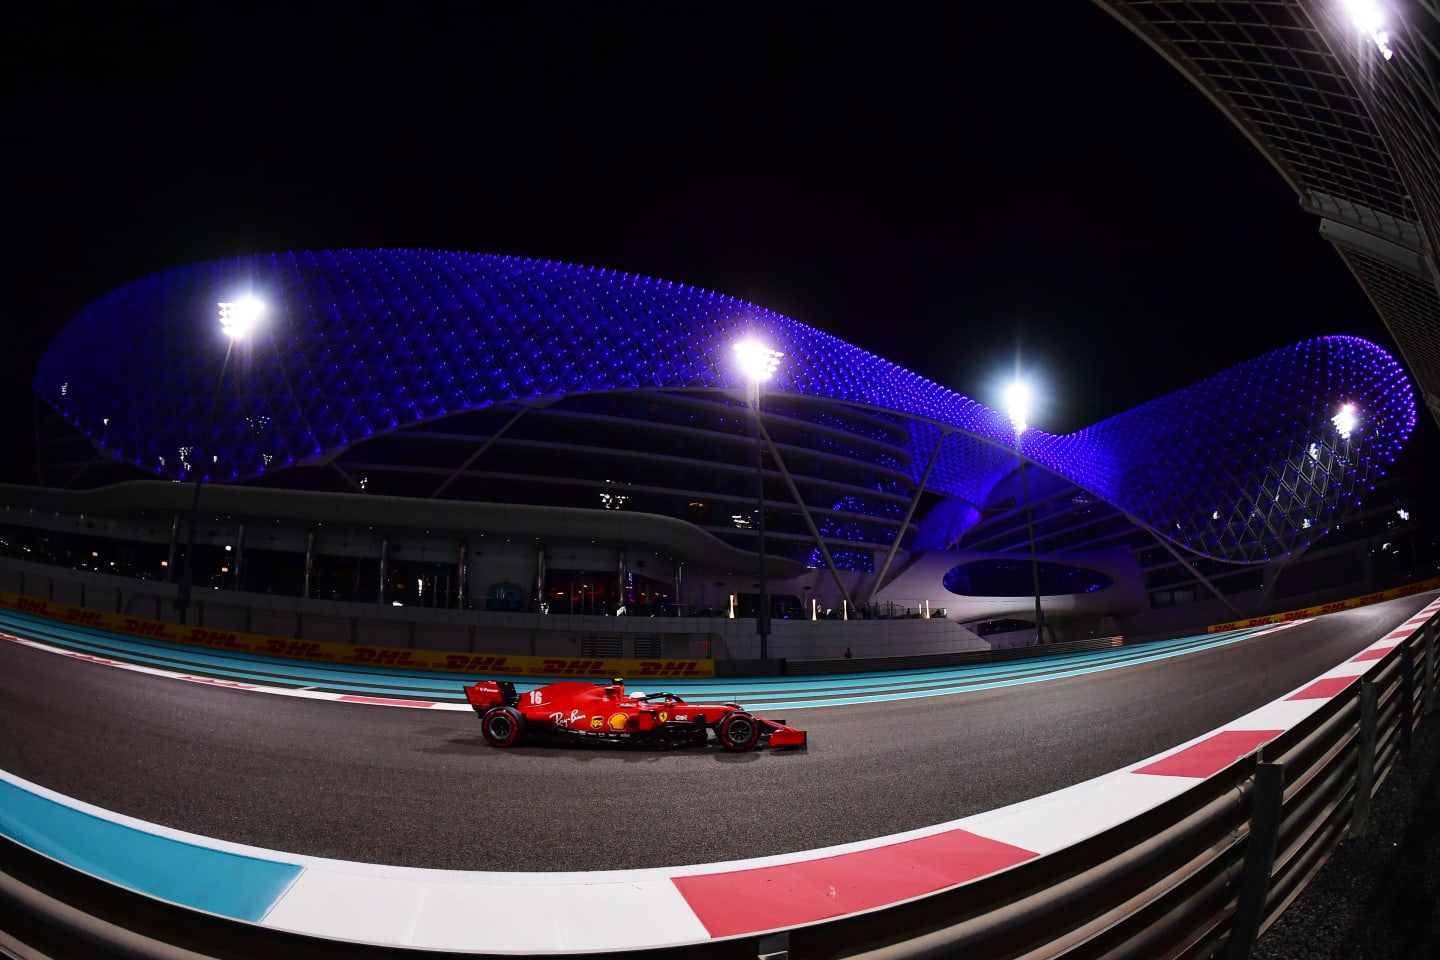 ABU DHABI, UNITED ARAB EMIRATES - DECEMBER 11: Charles Leclerc of Monaco driving the (16) Scuderia Ferrari SF1000 on track during practice ahead of the F1 Grand Prix of Abu Dhabi at Yas Marina Circuit on December 11, 2020 in Abu Dhabi, United Arab Emirates. (Photo by Giuseppe Cacace - Pool/Getty Images)